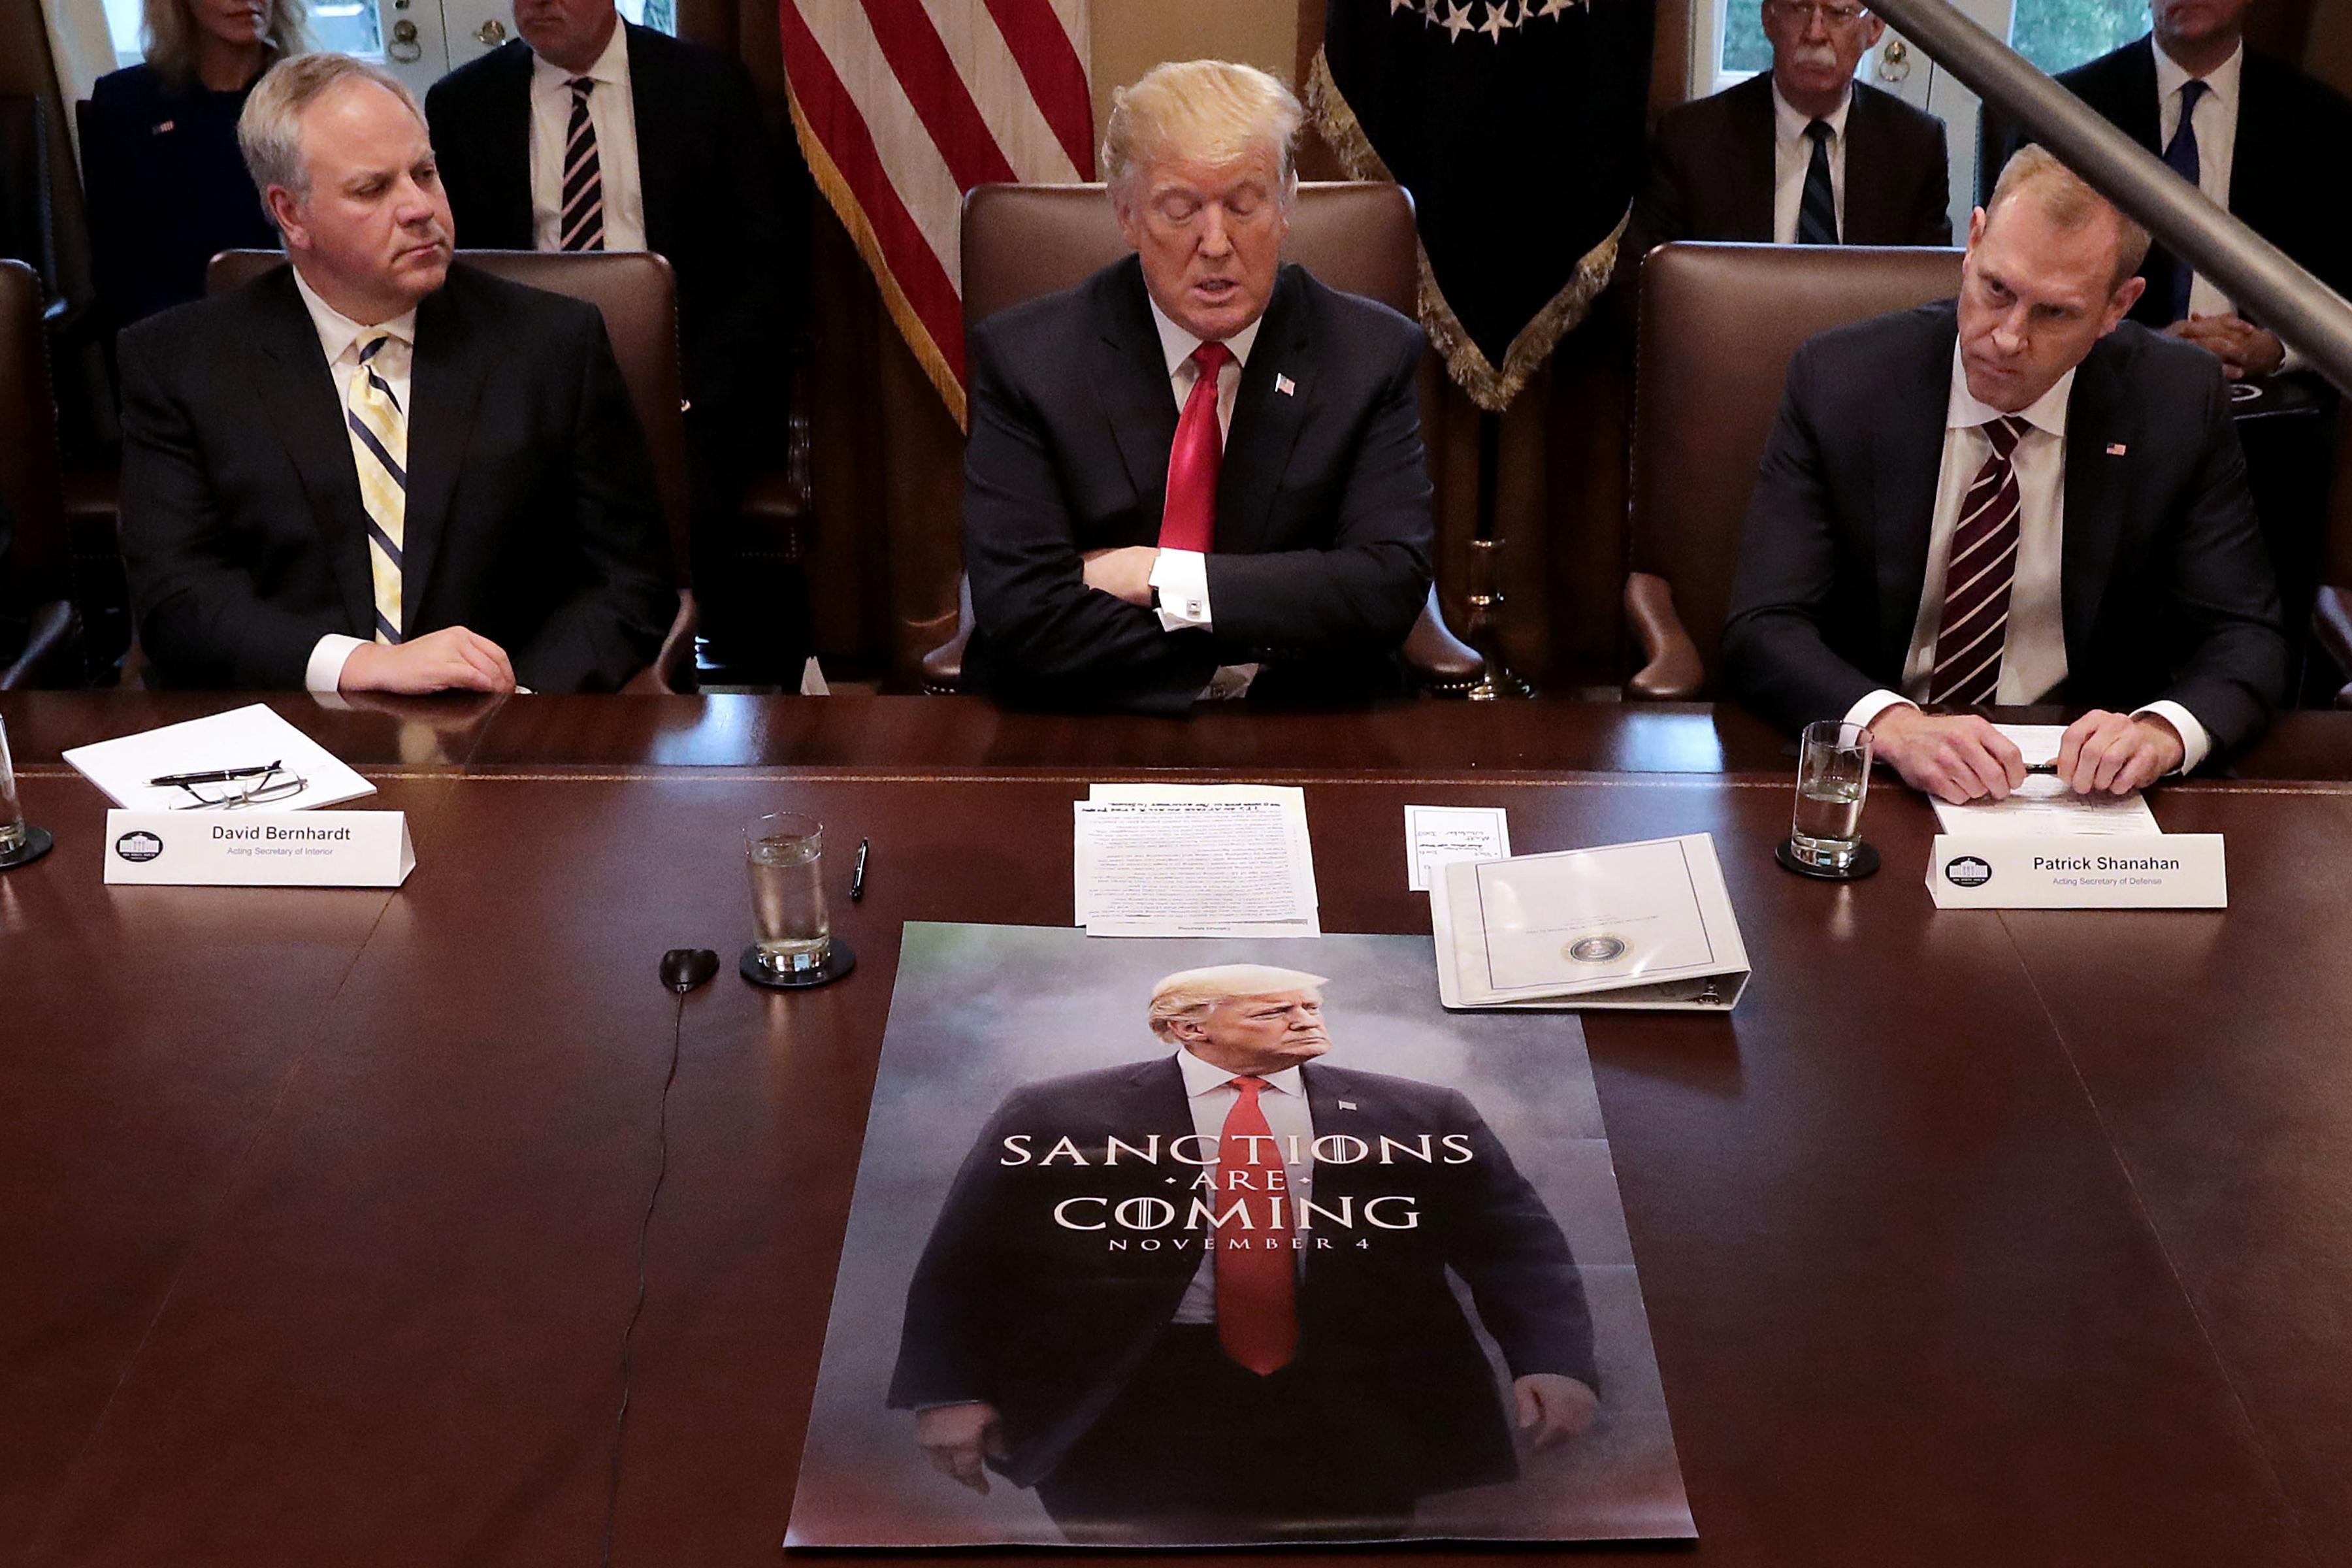 President Trump sits in front of a Game of Thrones knock off poster during a cabinet meeting after saying earlier he would "look foolish" if he opened the government without wall funding. 